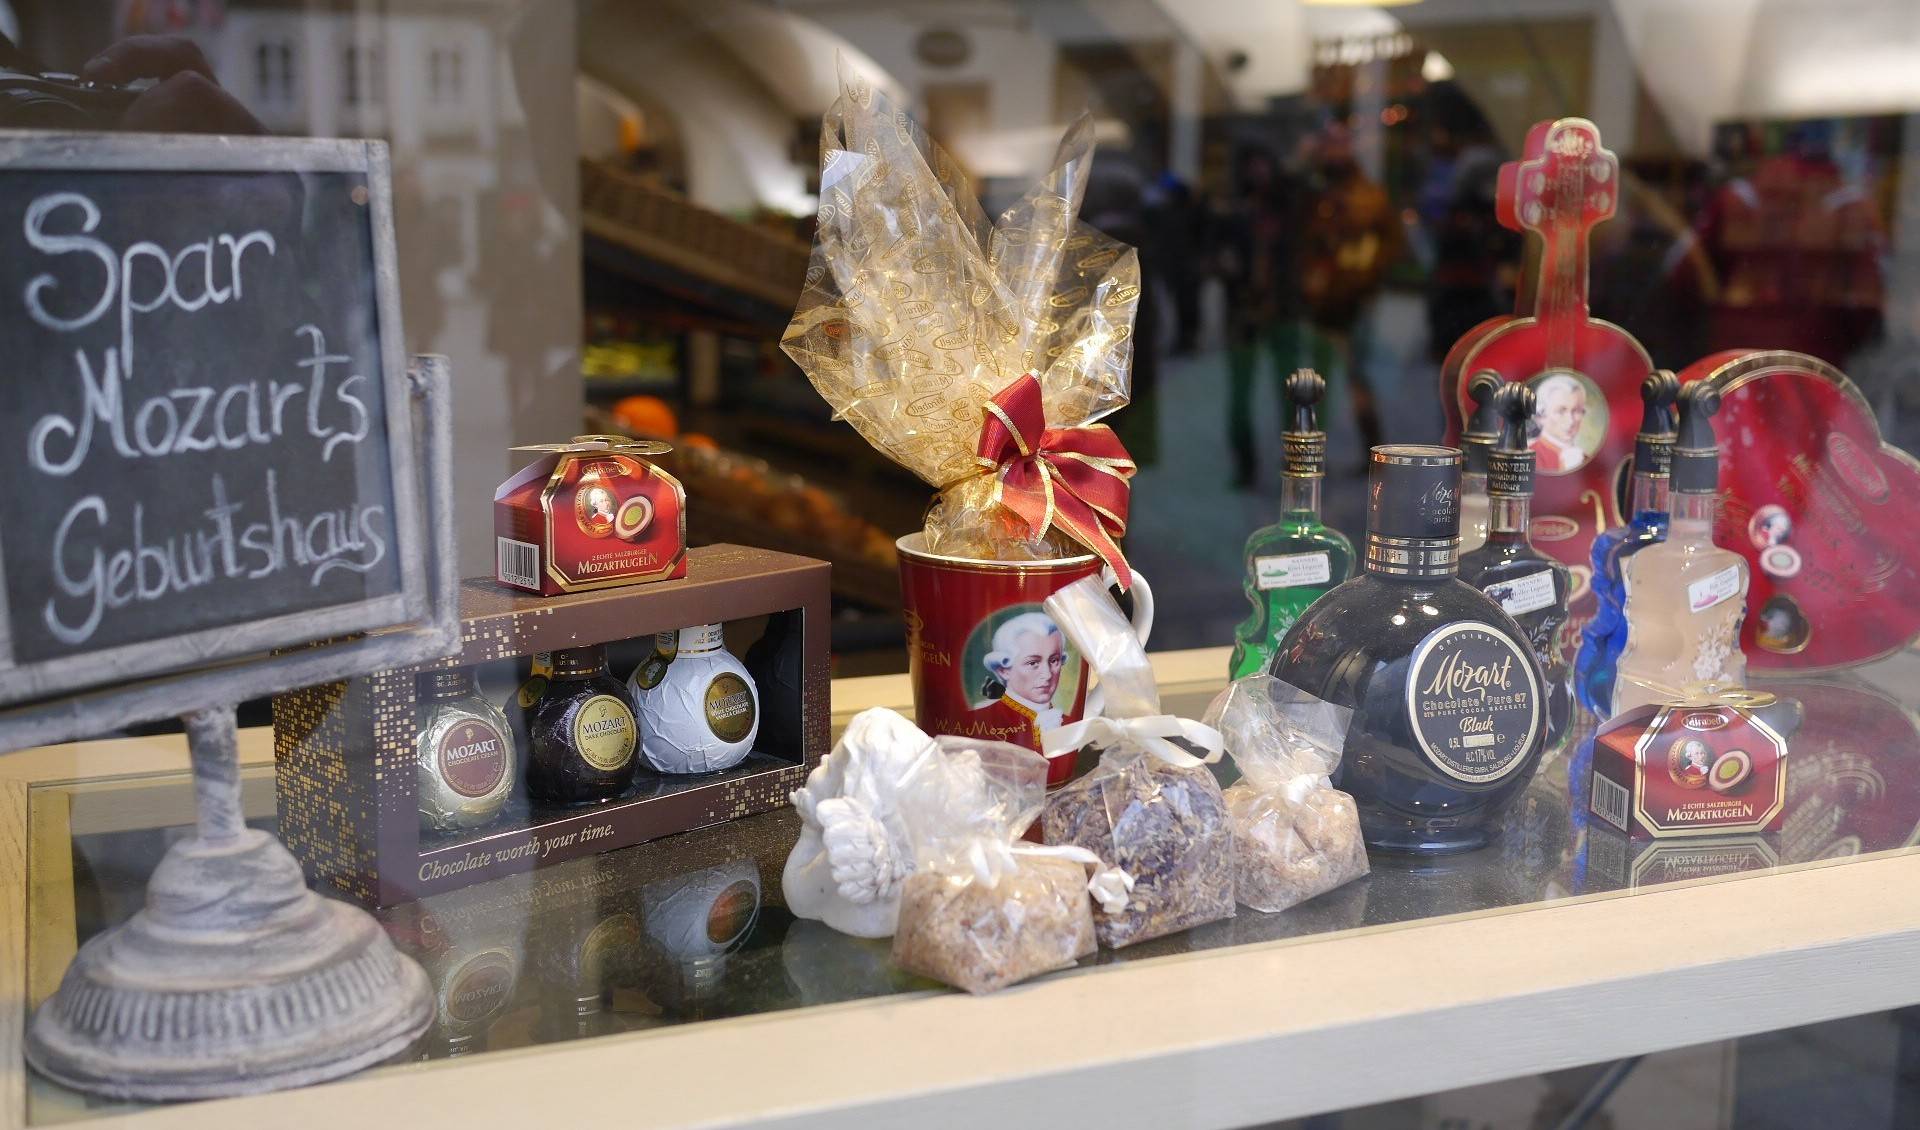 What to Buy in Salzburg: 17 Ideas of Souvenirs and Gifts